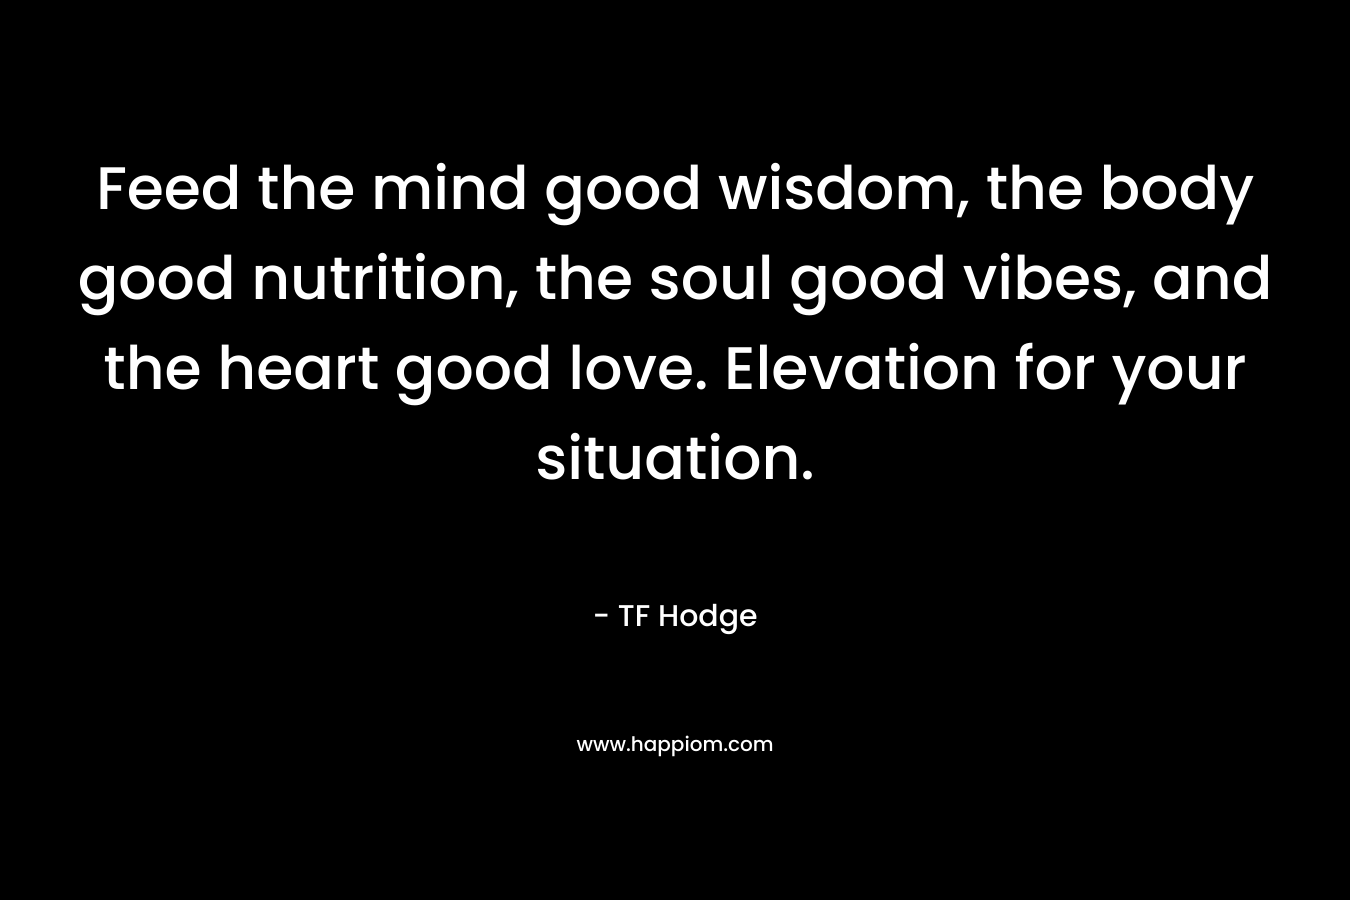 Feed the mind good wisdom, the body good nutrition, the soul good vibes, and the heart good love. Elevation for your situation.